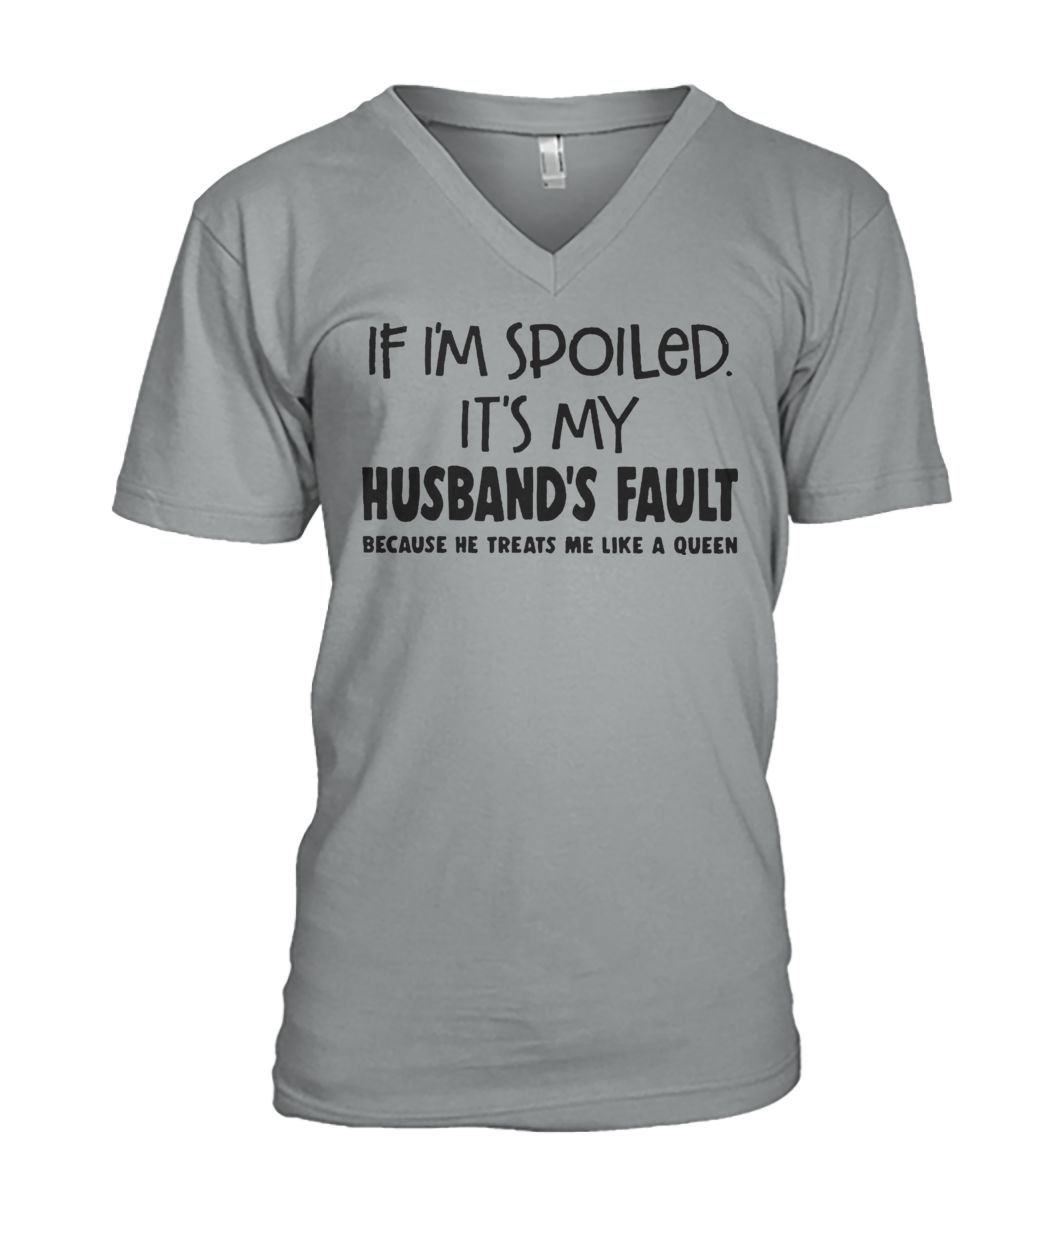 If I'm spoiled it's my husband's fault because he treats me like a queen mens v-neck